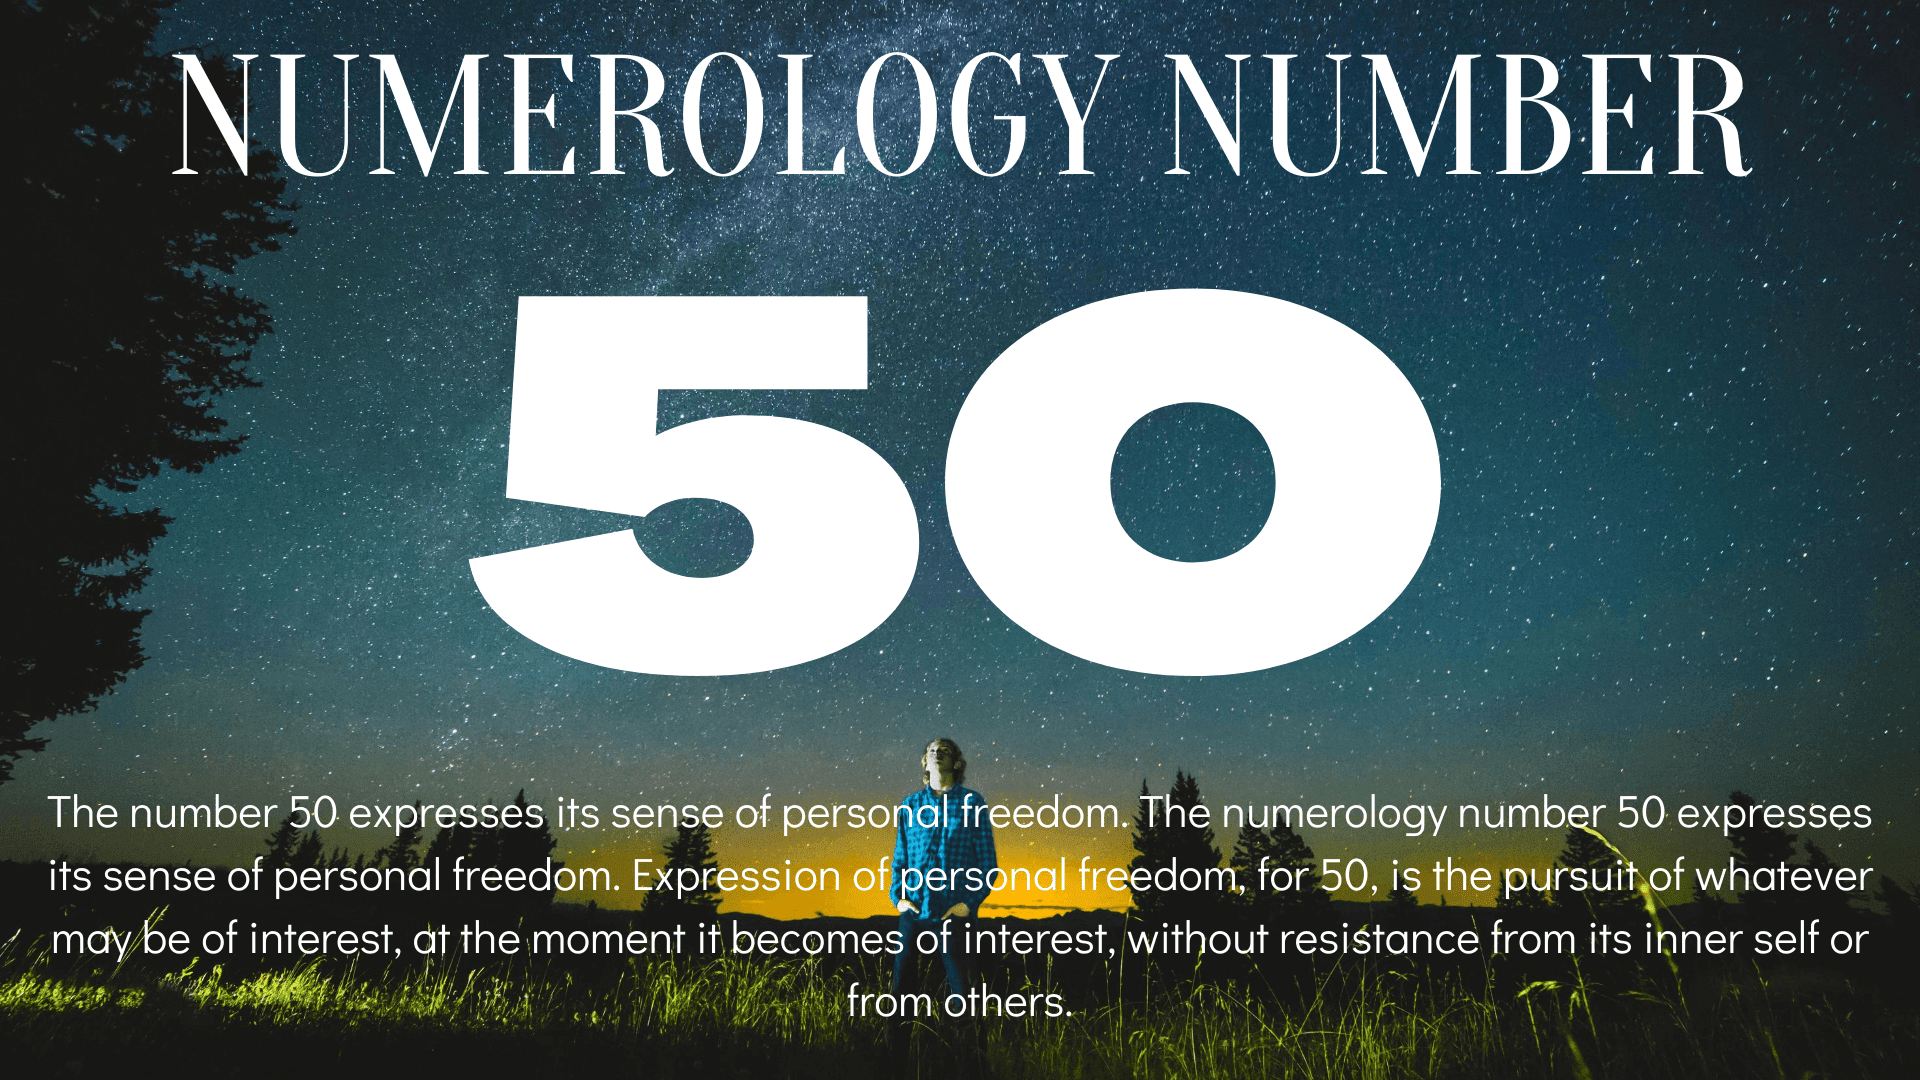 A man with his hands on his pocket while looking at the stars in the sky with words Numerology Number 50